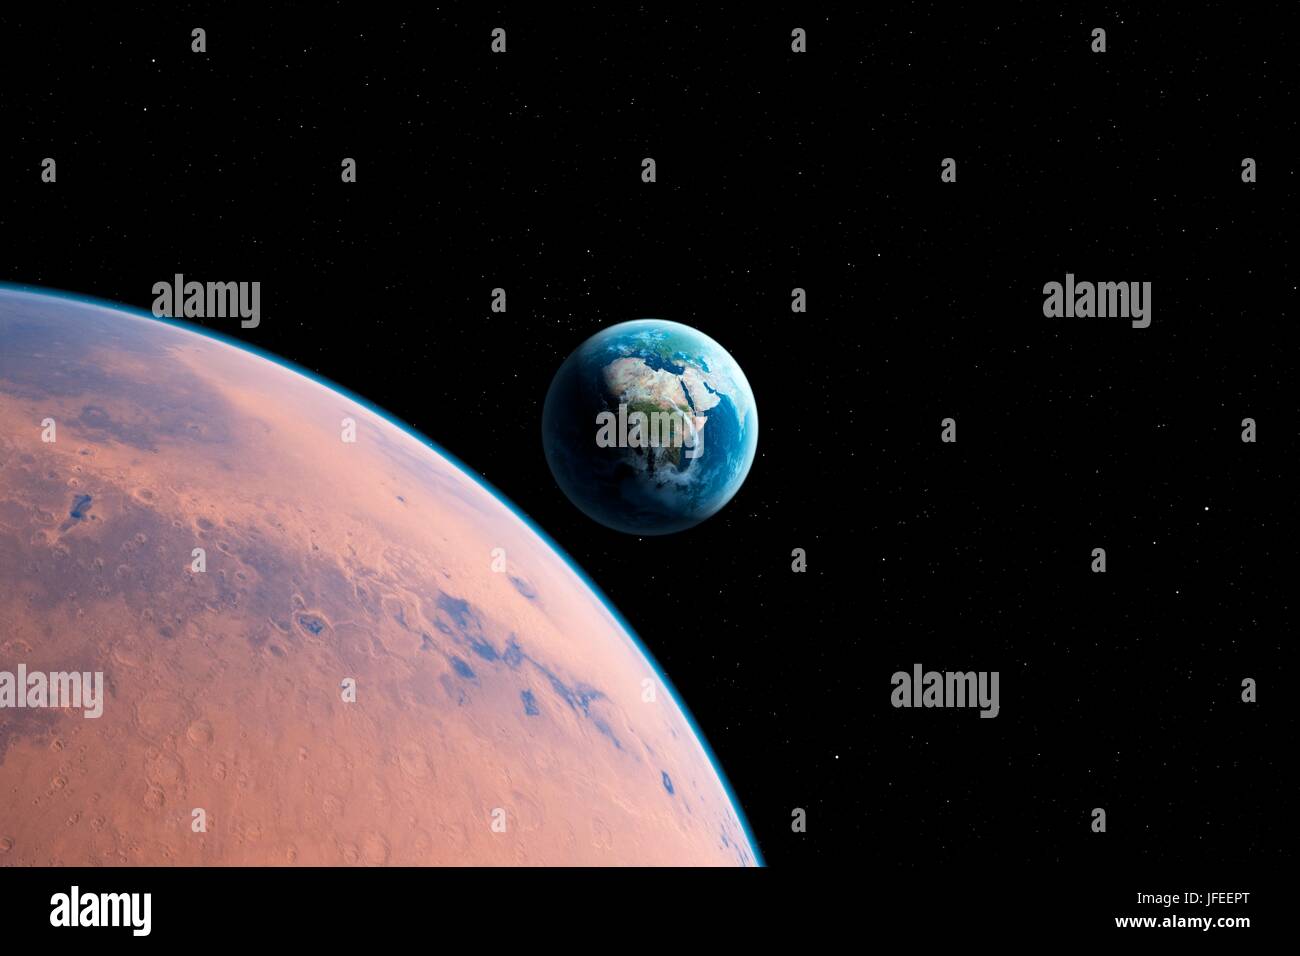 Planet with Earth in distance, illustration. Stock Photo